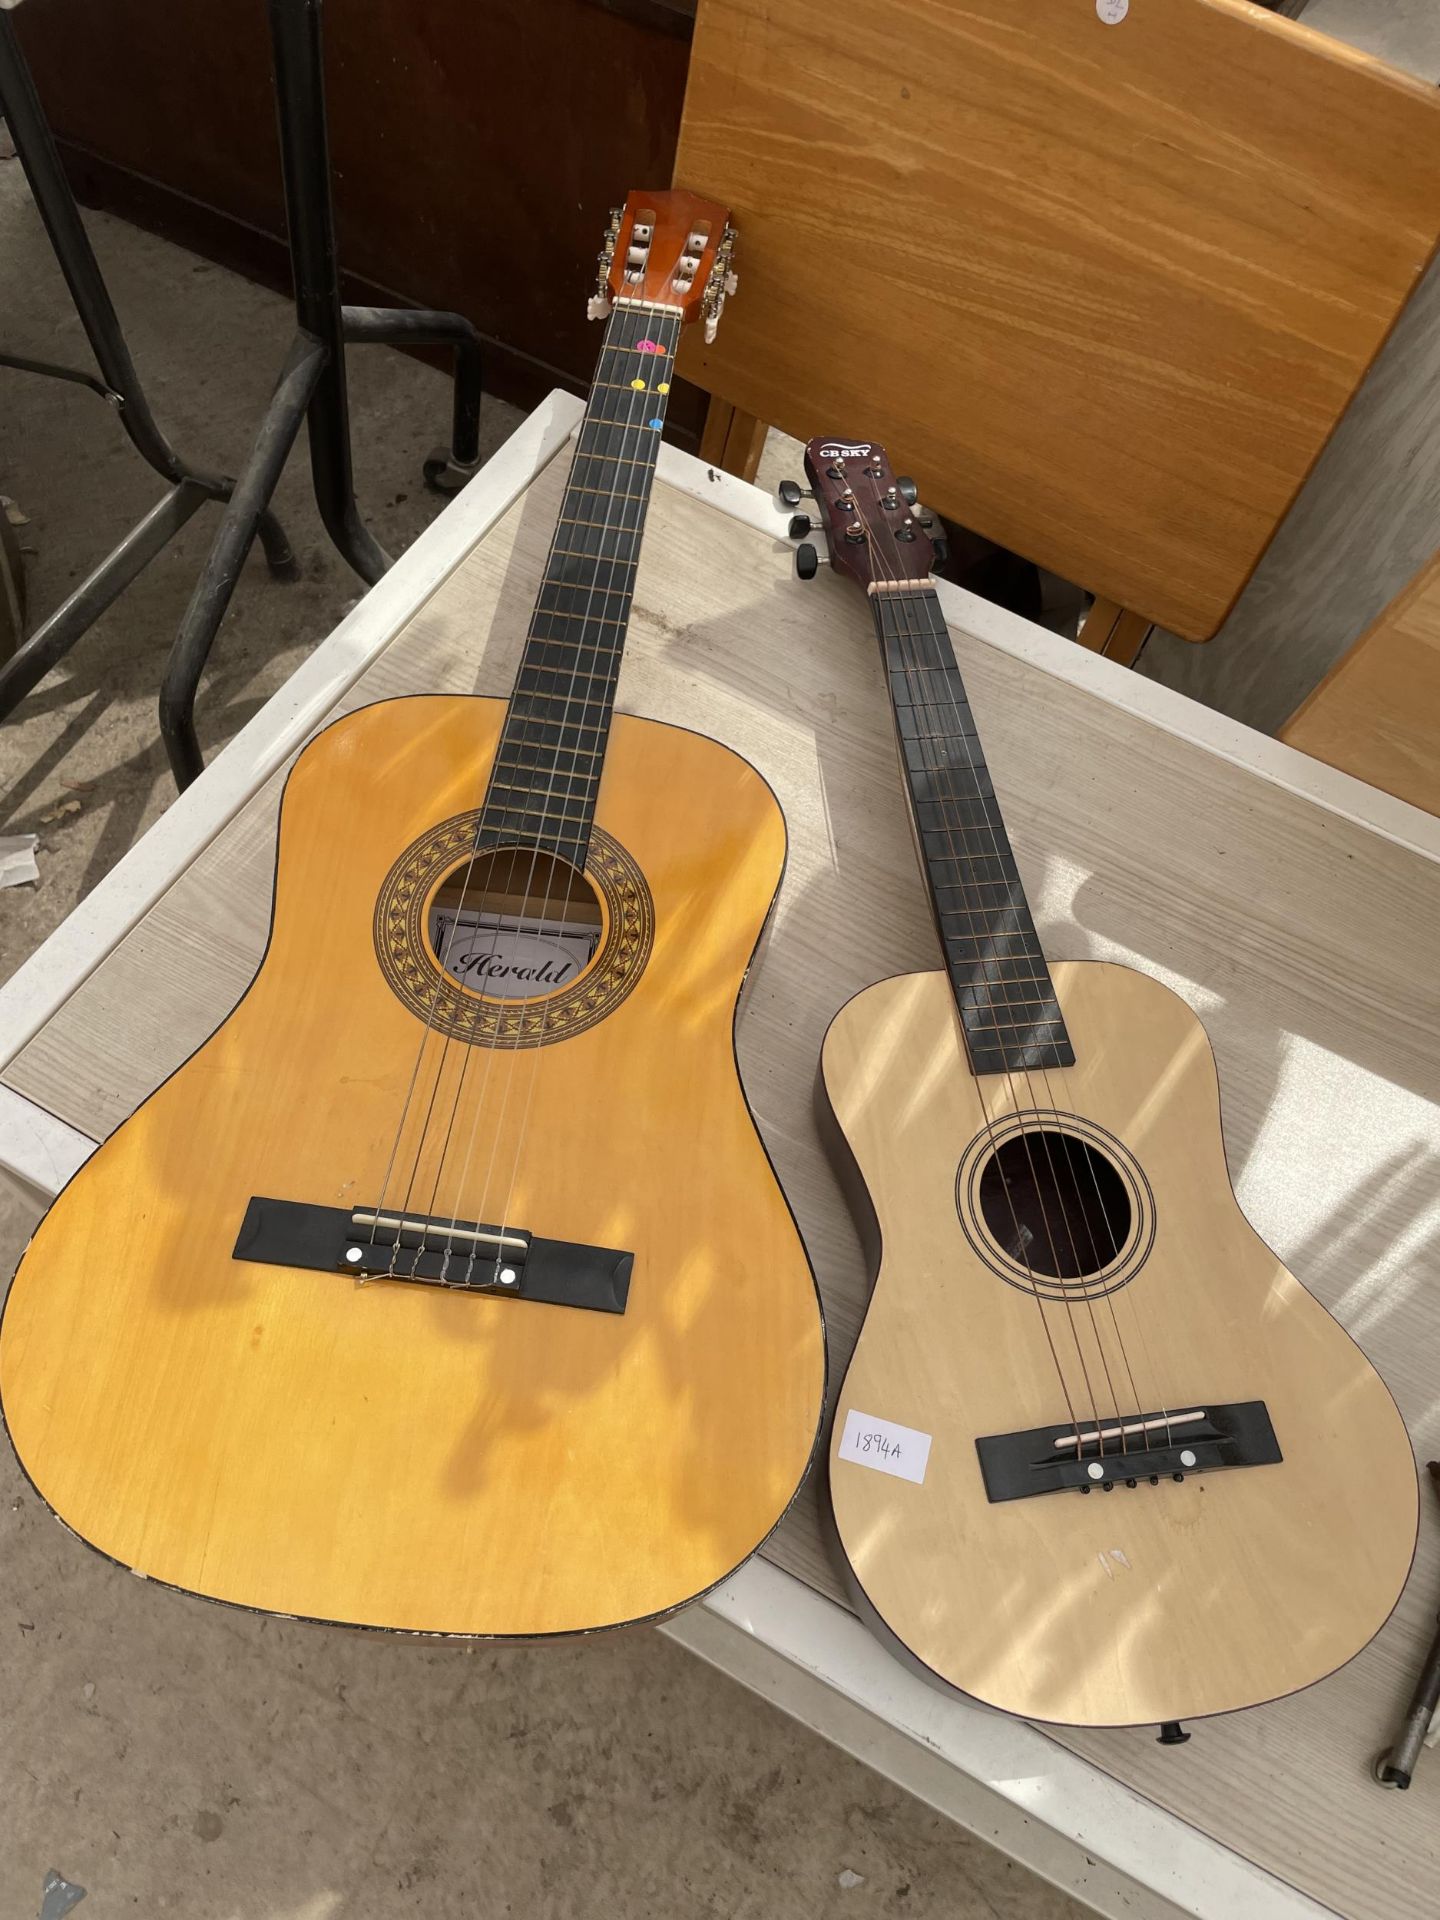 A HERALD ACOUSTIC GUITAR AND A FURTHER CHILDS ACOUSTIC GUITAR